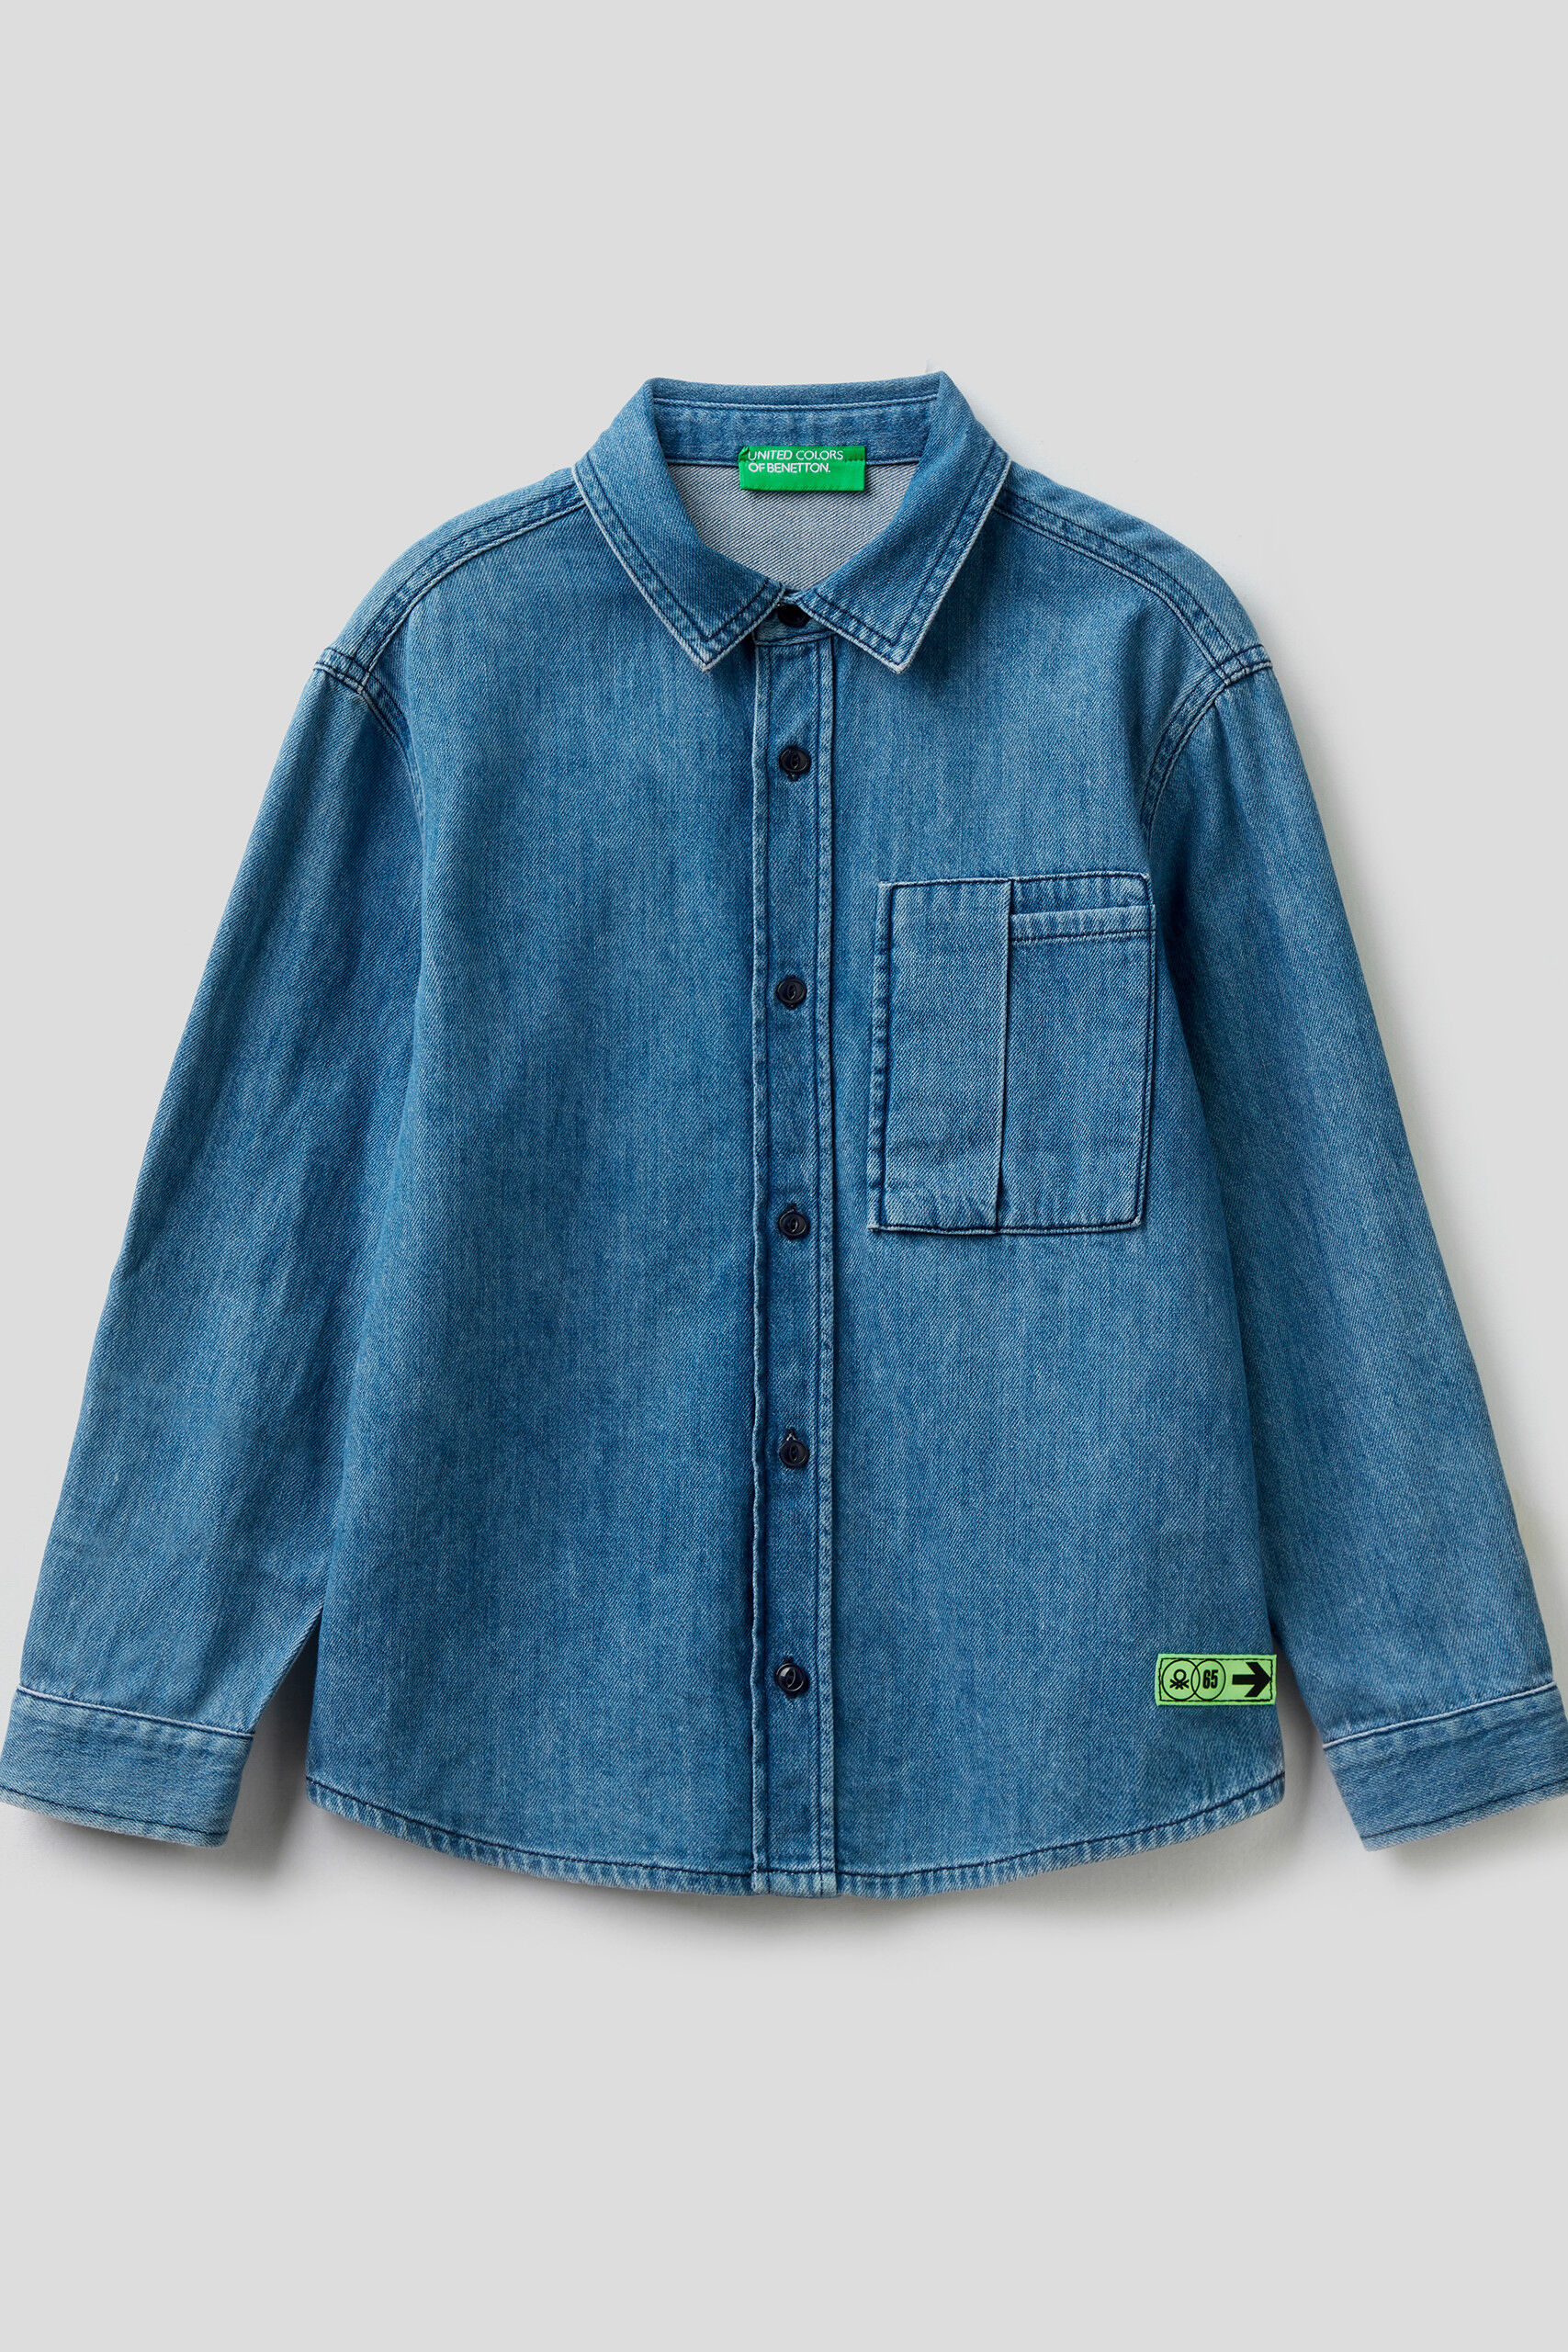 Junior Boys' T-shirts and Shirts Collection 2022 | Benetton